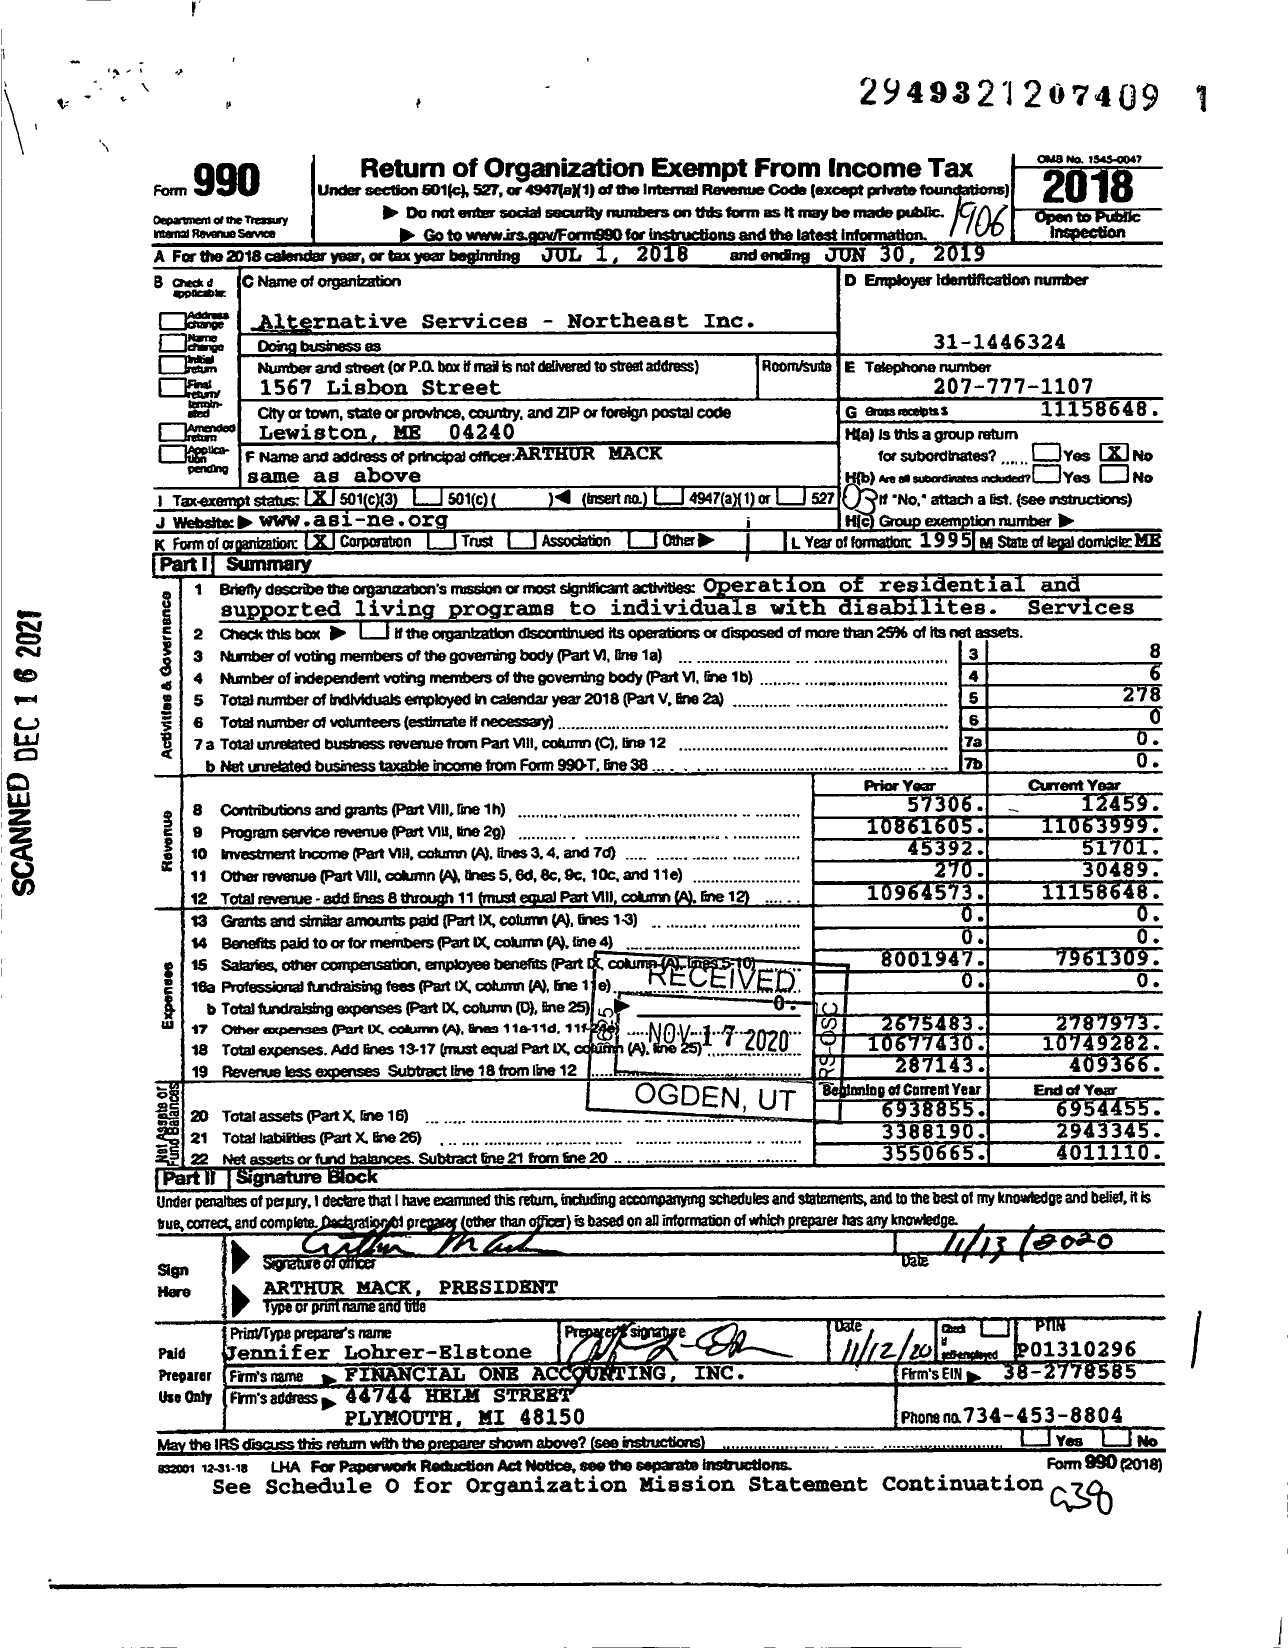 Image of first page of 2018 Form 990 for Alternative Services - Northeast